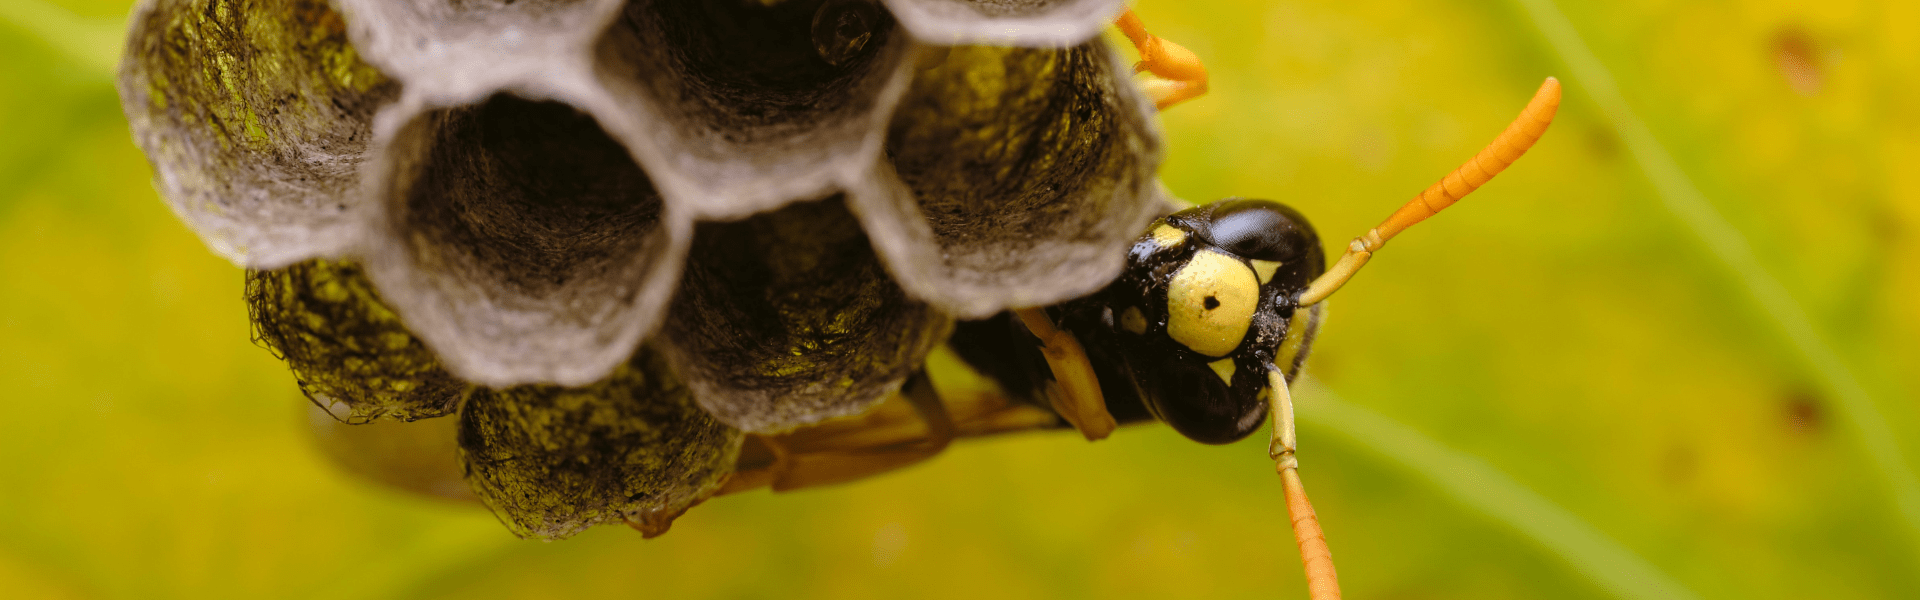 An image of a wasp peeking over its nest.